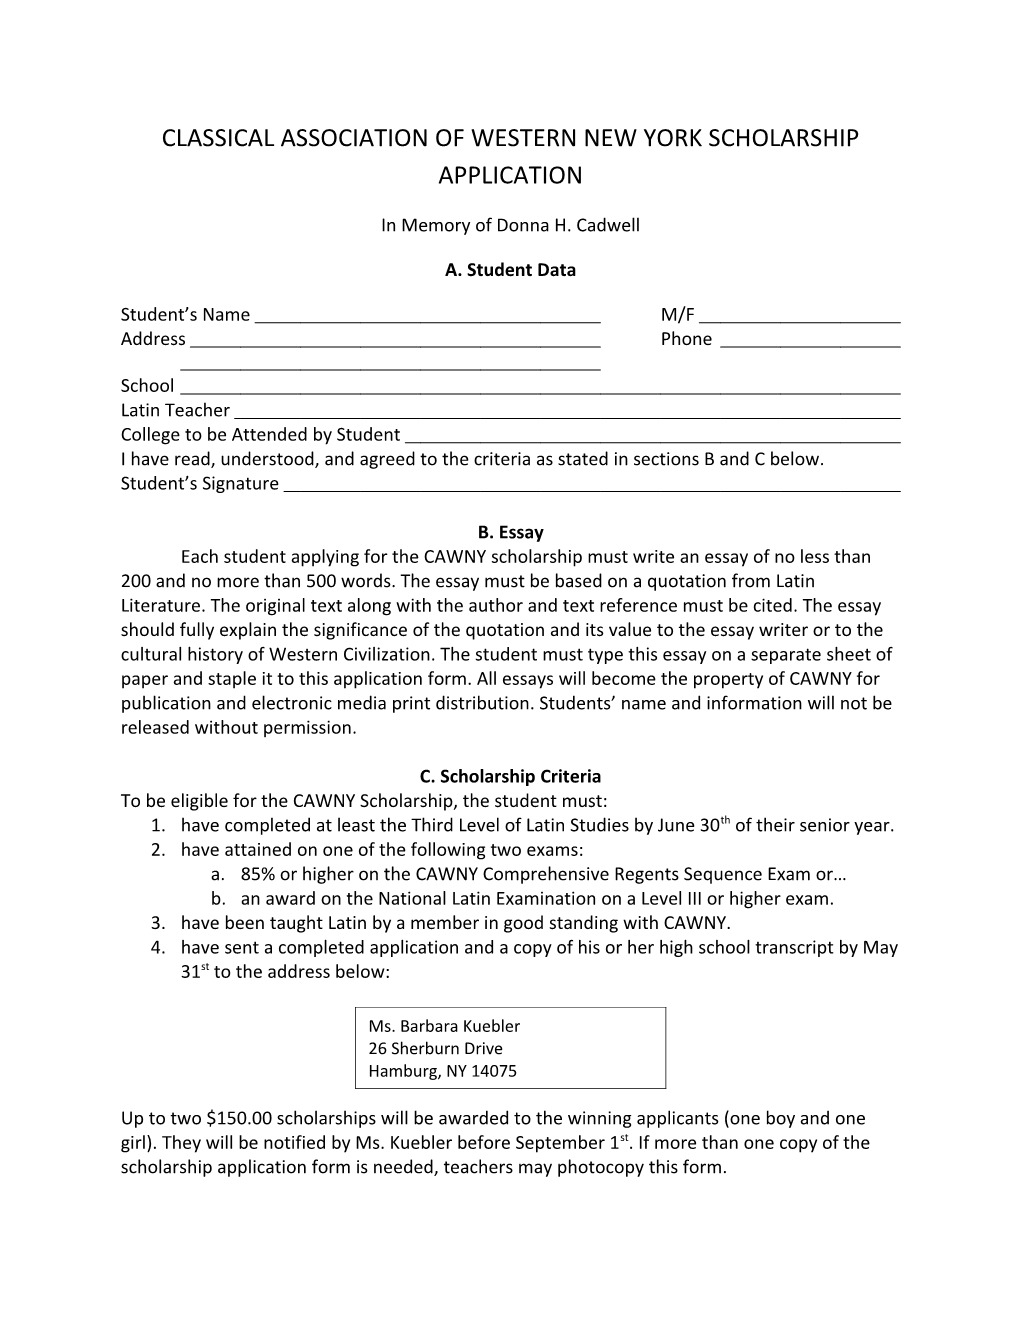 Classical Association of Western New York Scholarship Application